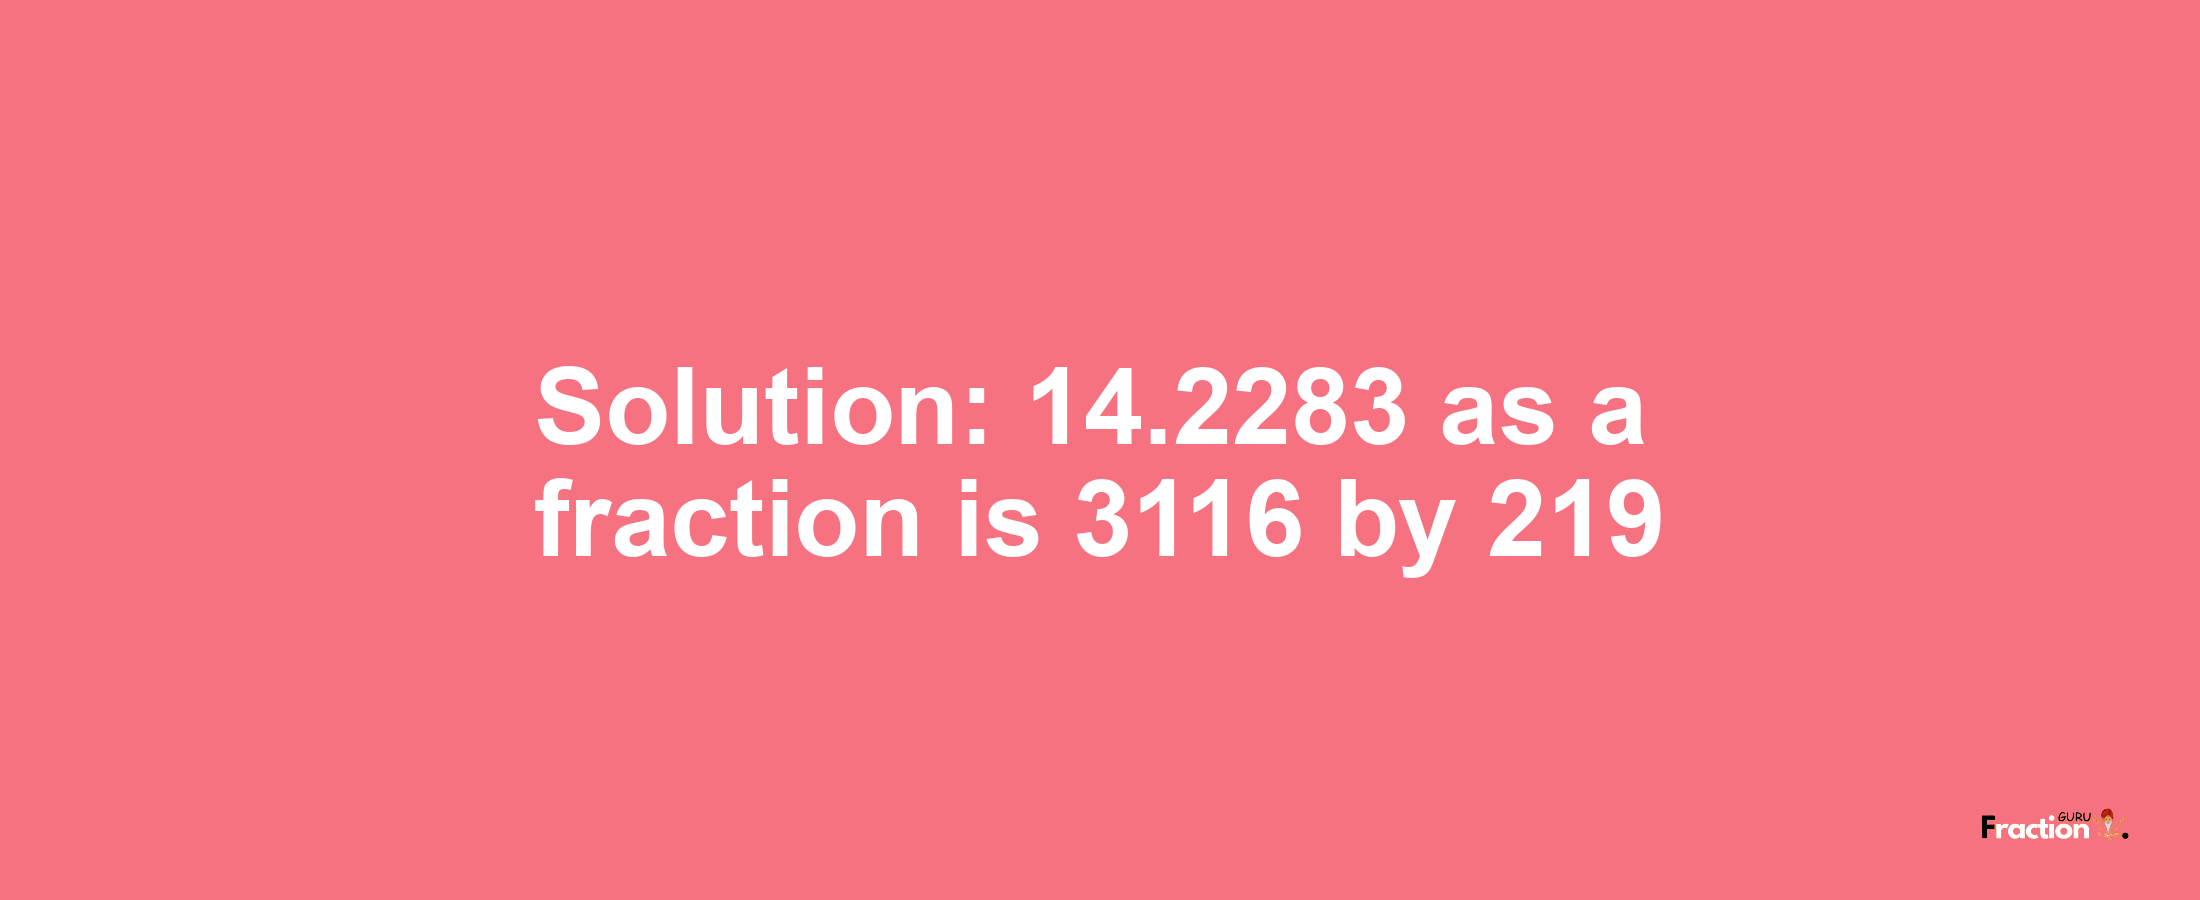 Solution:14.2283 as a fraction is 3116/219